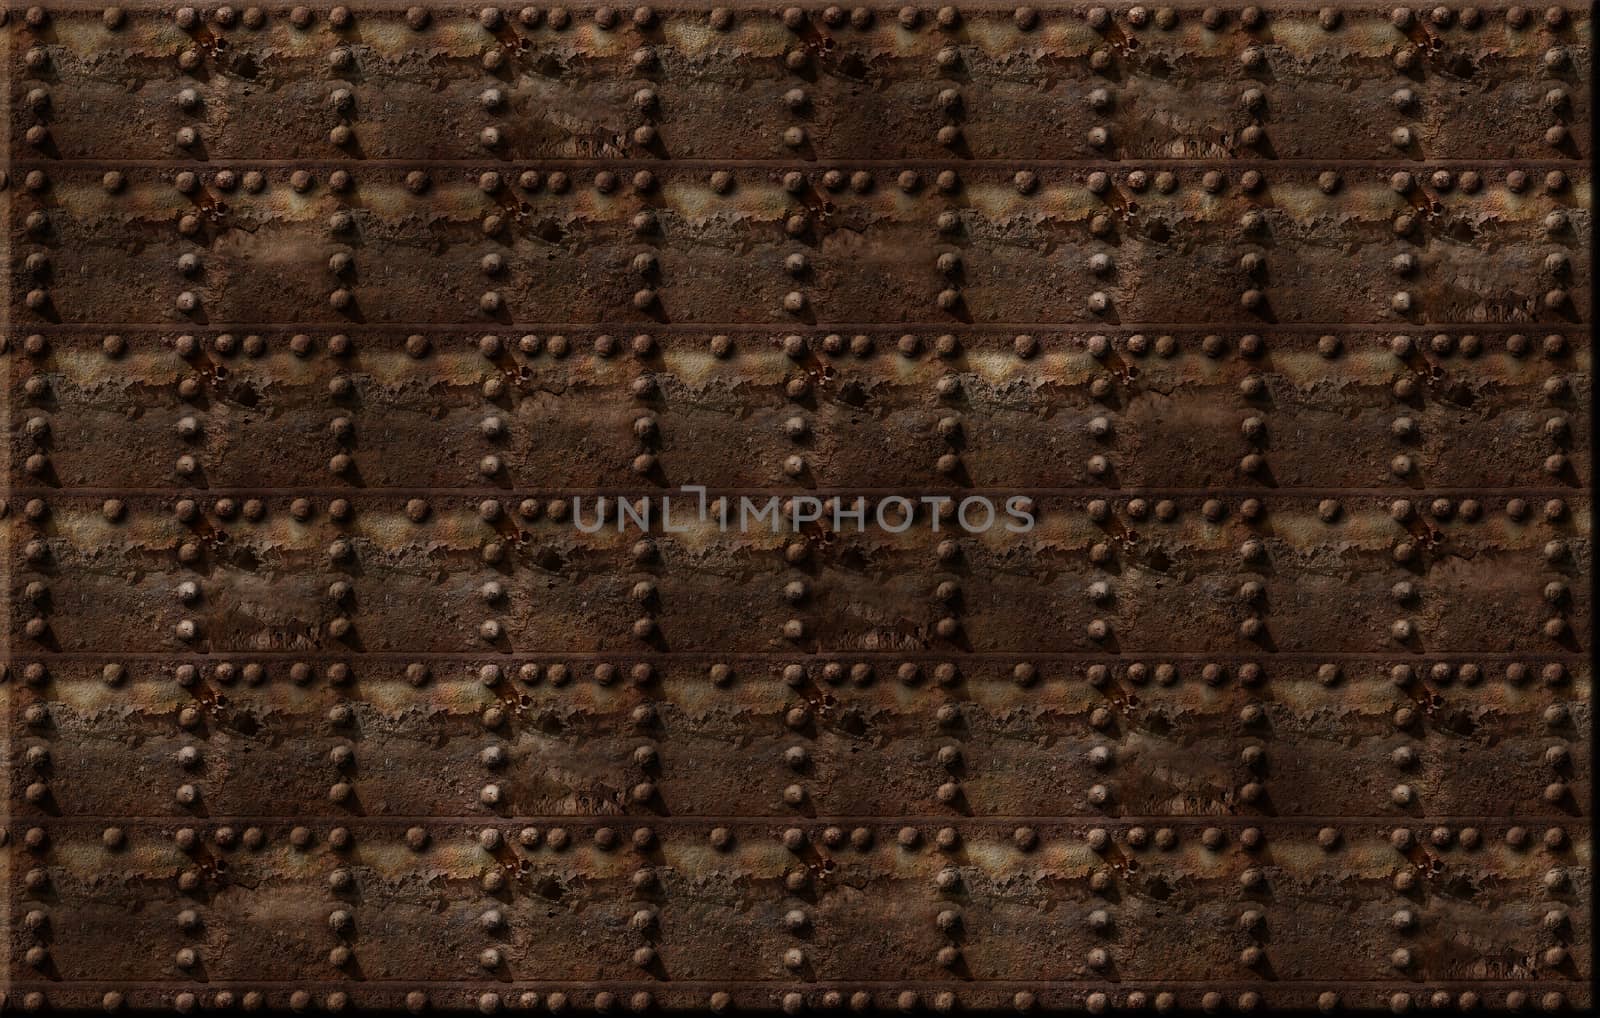 Photo illustration of a rusty metal riveted wall.